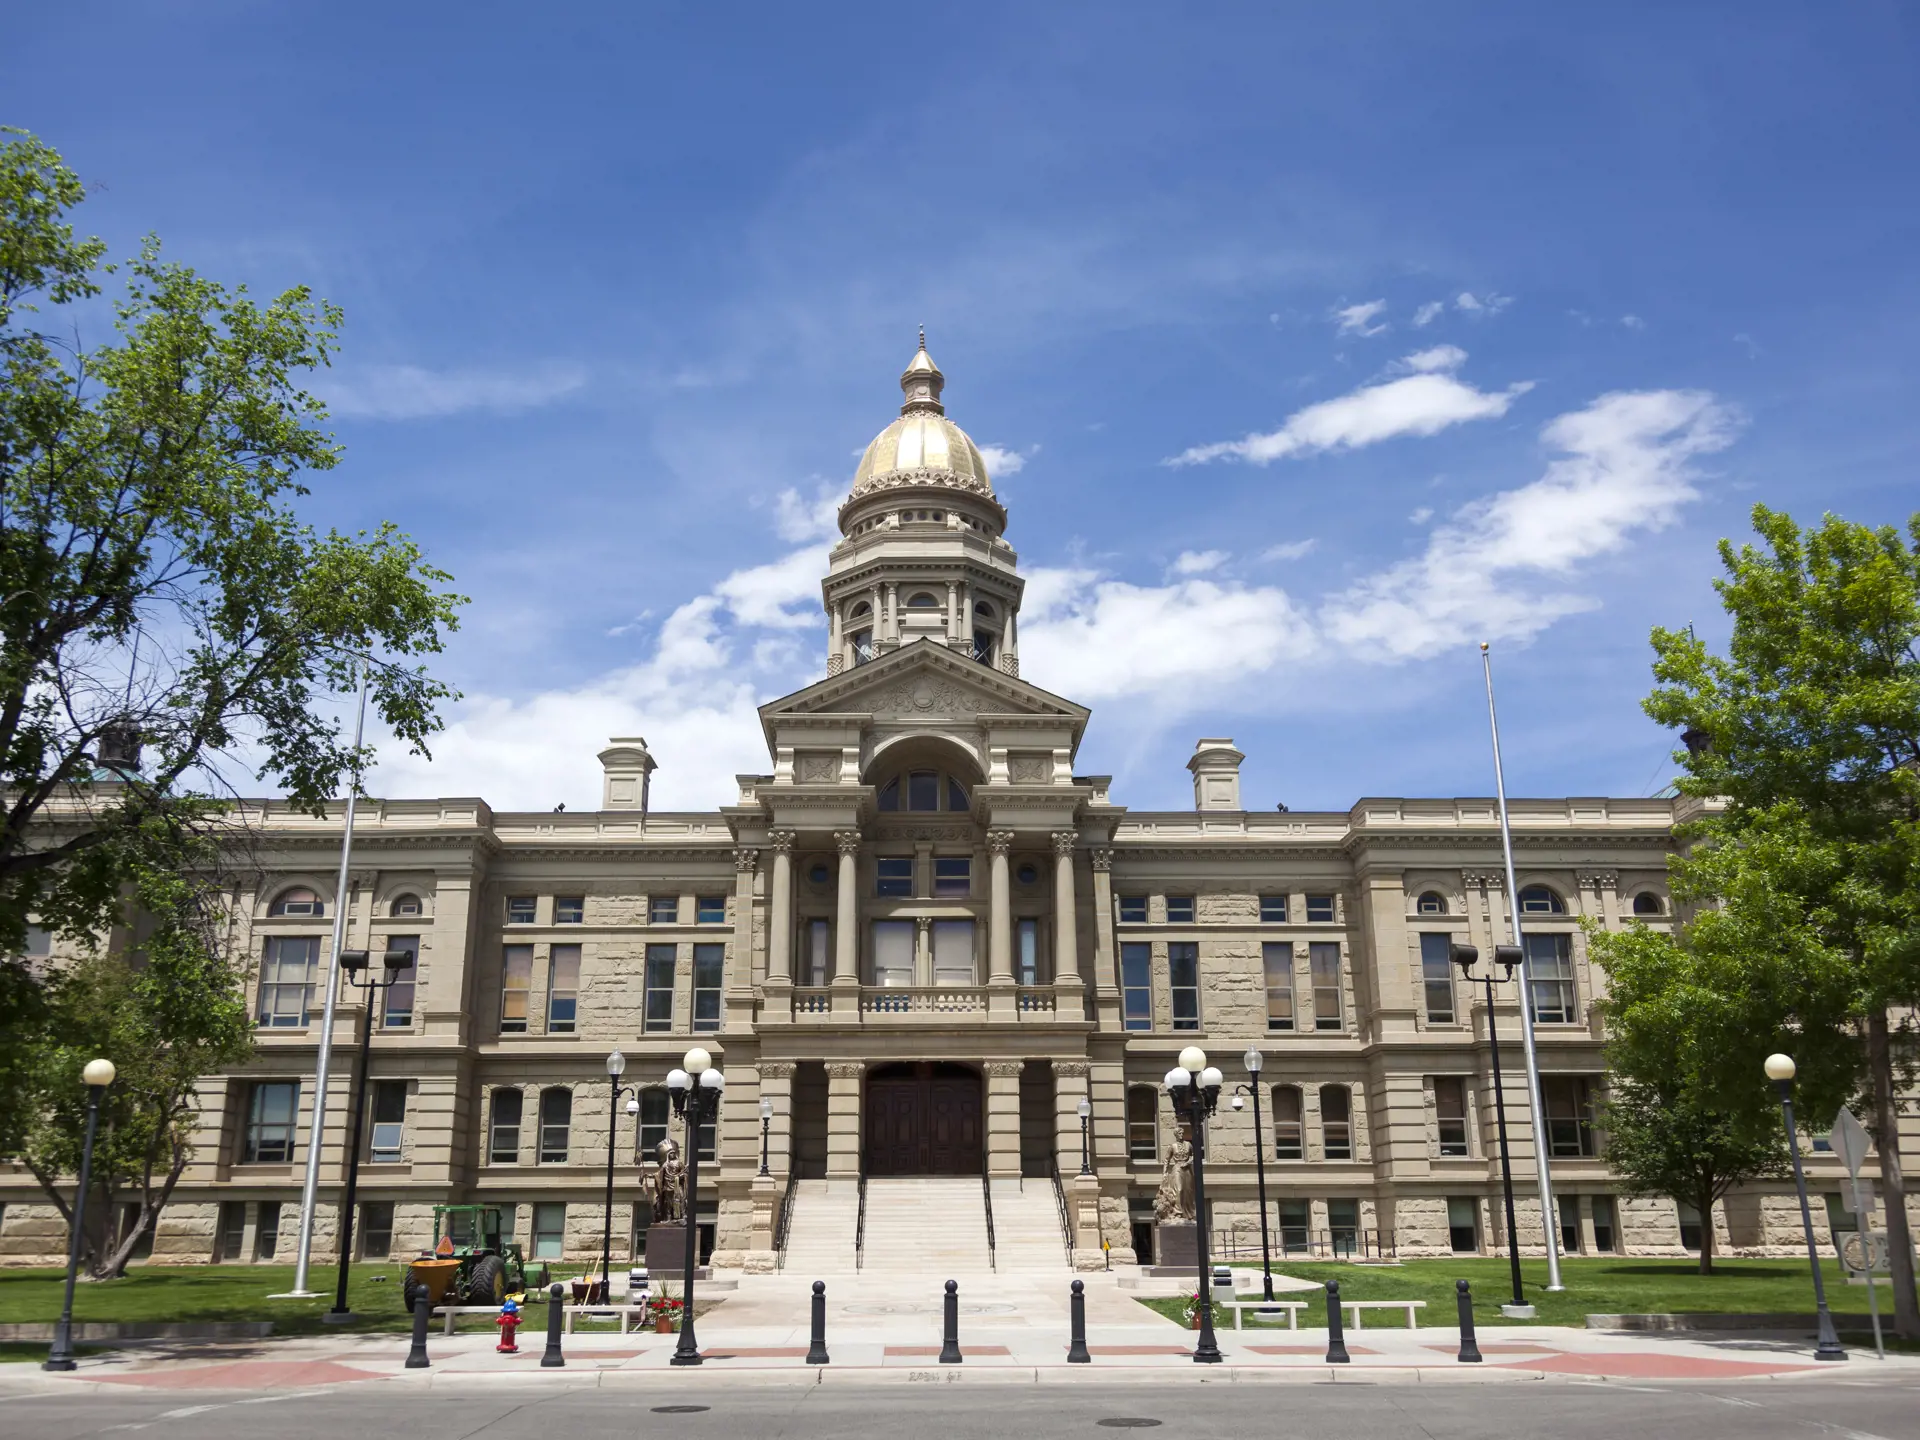 dag 4.shutterstock_183912404 The Capitol of the State of Wyoming, in Cheyenne, Wyoming..jpg